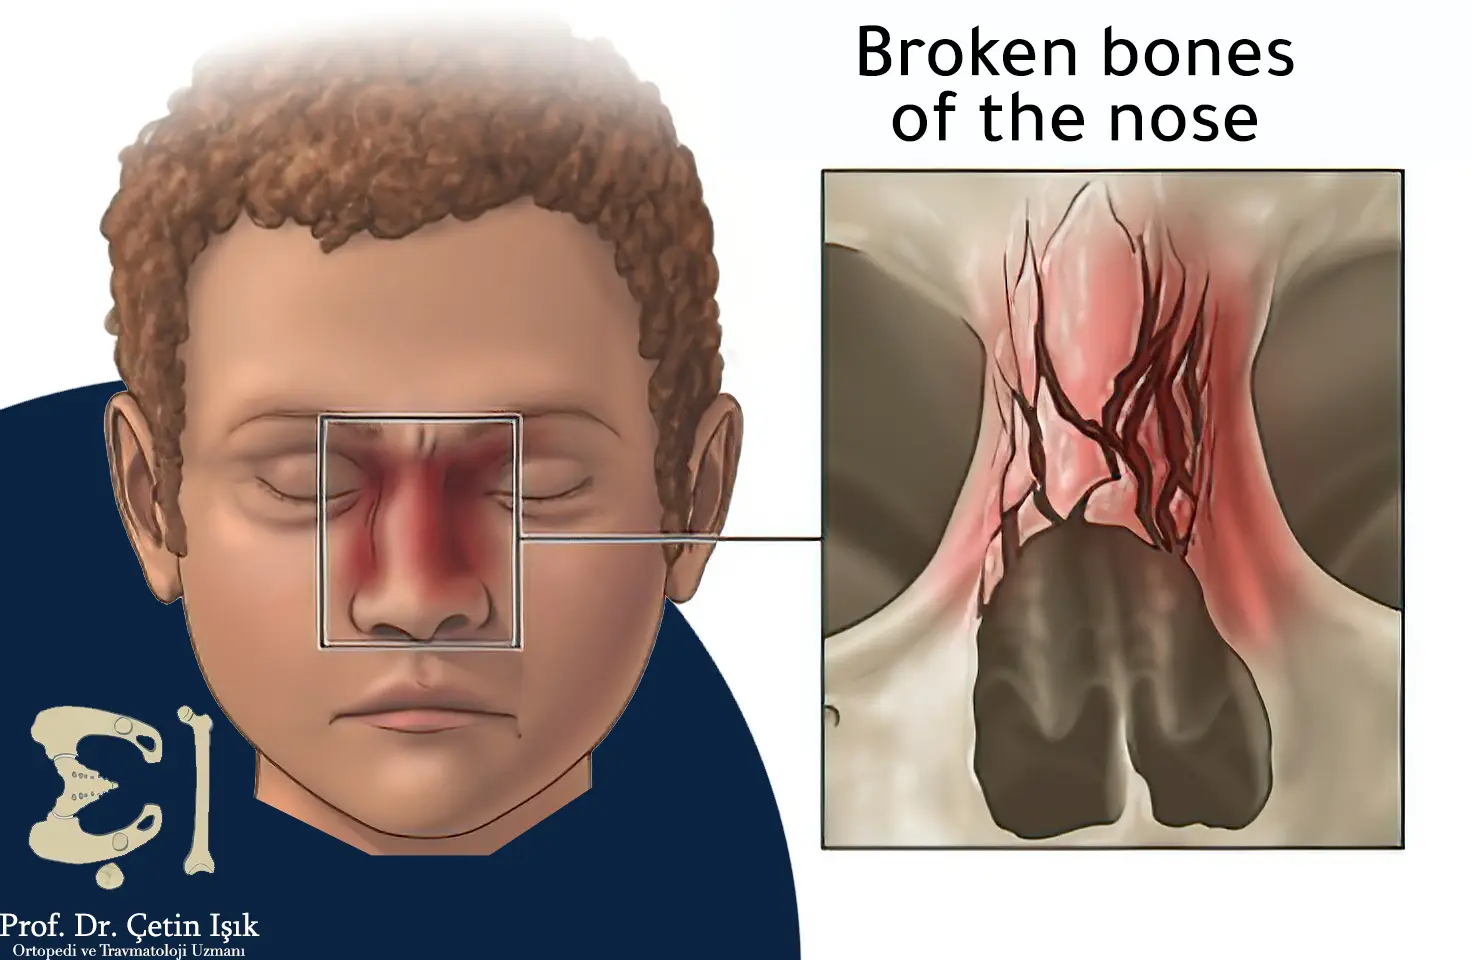 An image showing the occurrence of fractures in the nasal bones, where we notice that the upper (bony) part of the nose has been affected